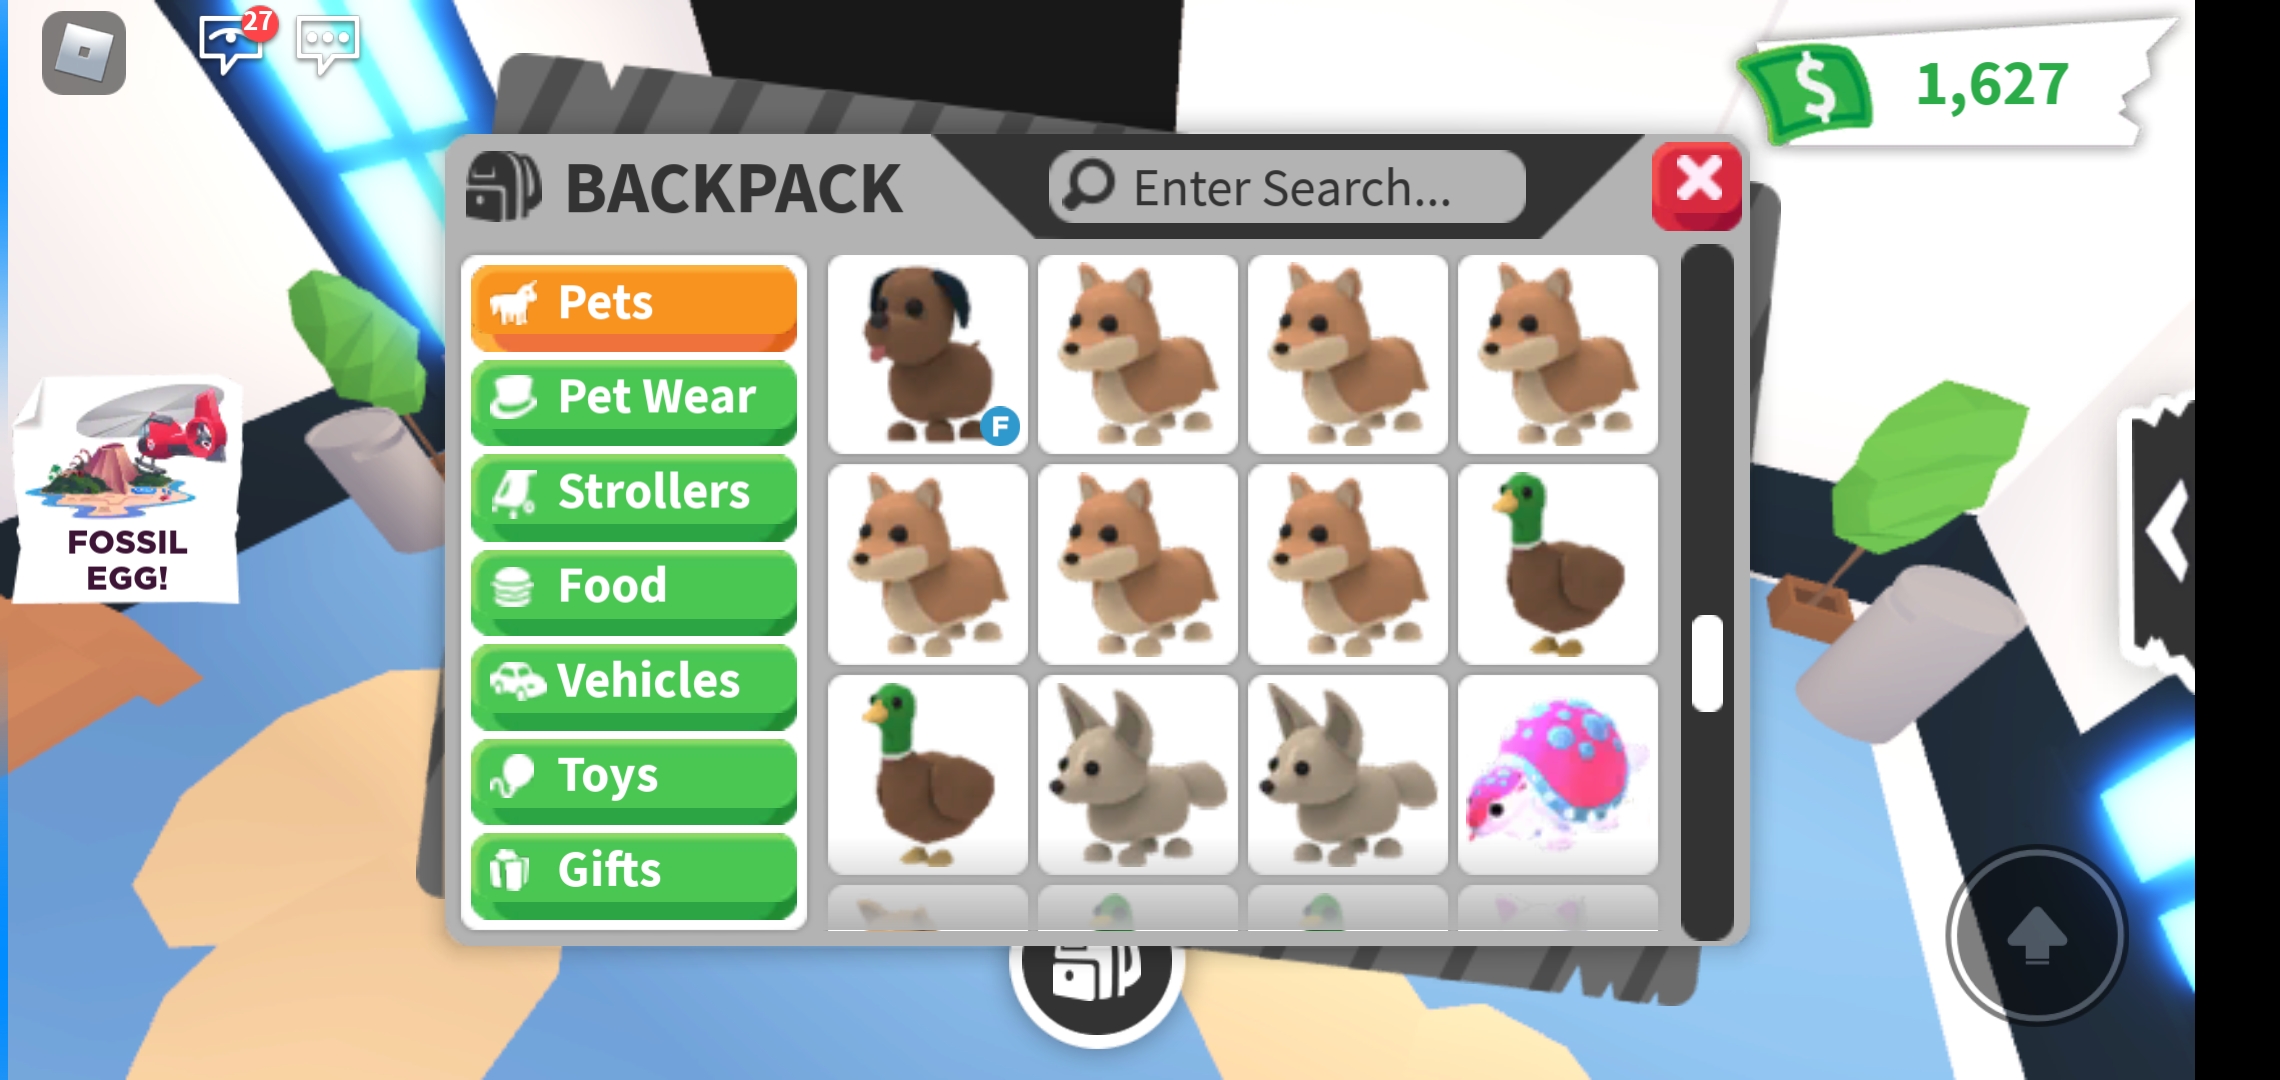 Fbykuijtrpg0zm - selling roblox account 30 leg eggs and 30 shadow pets